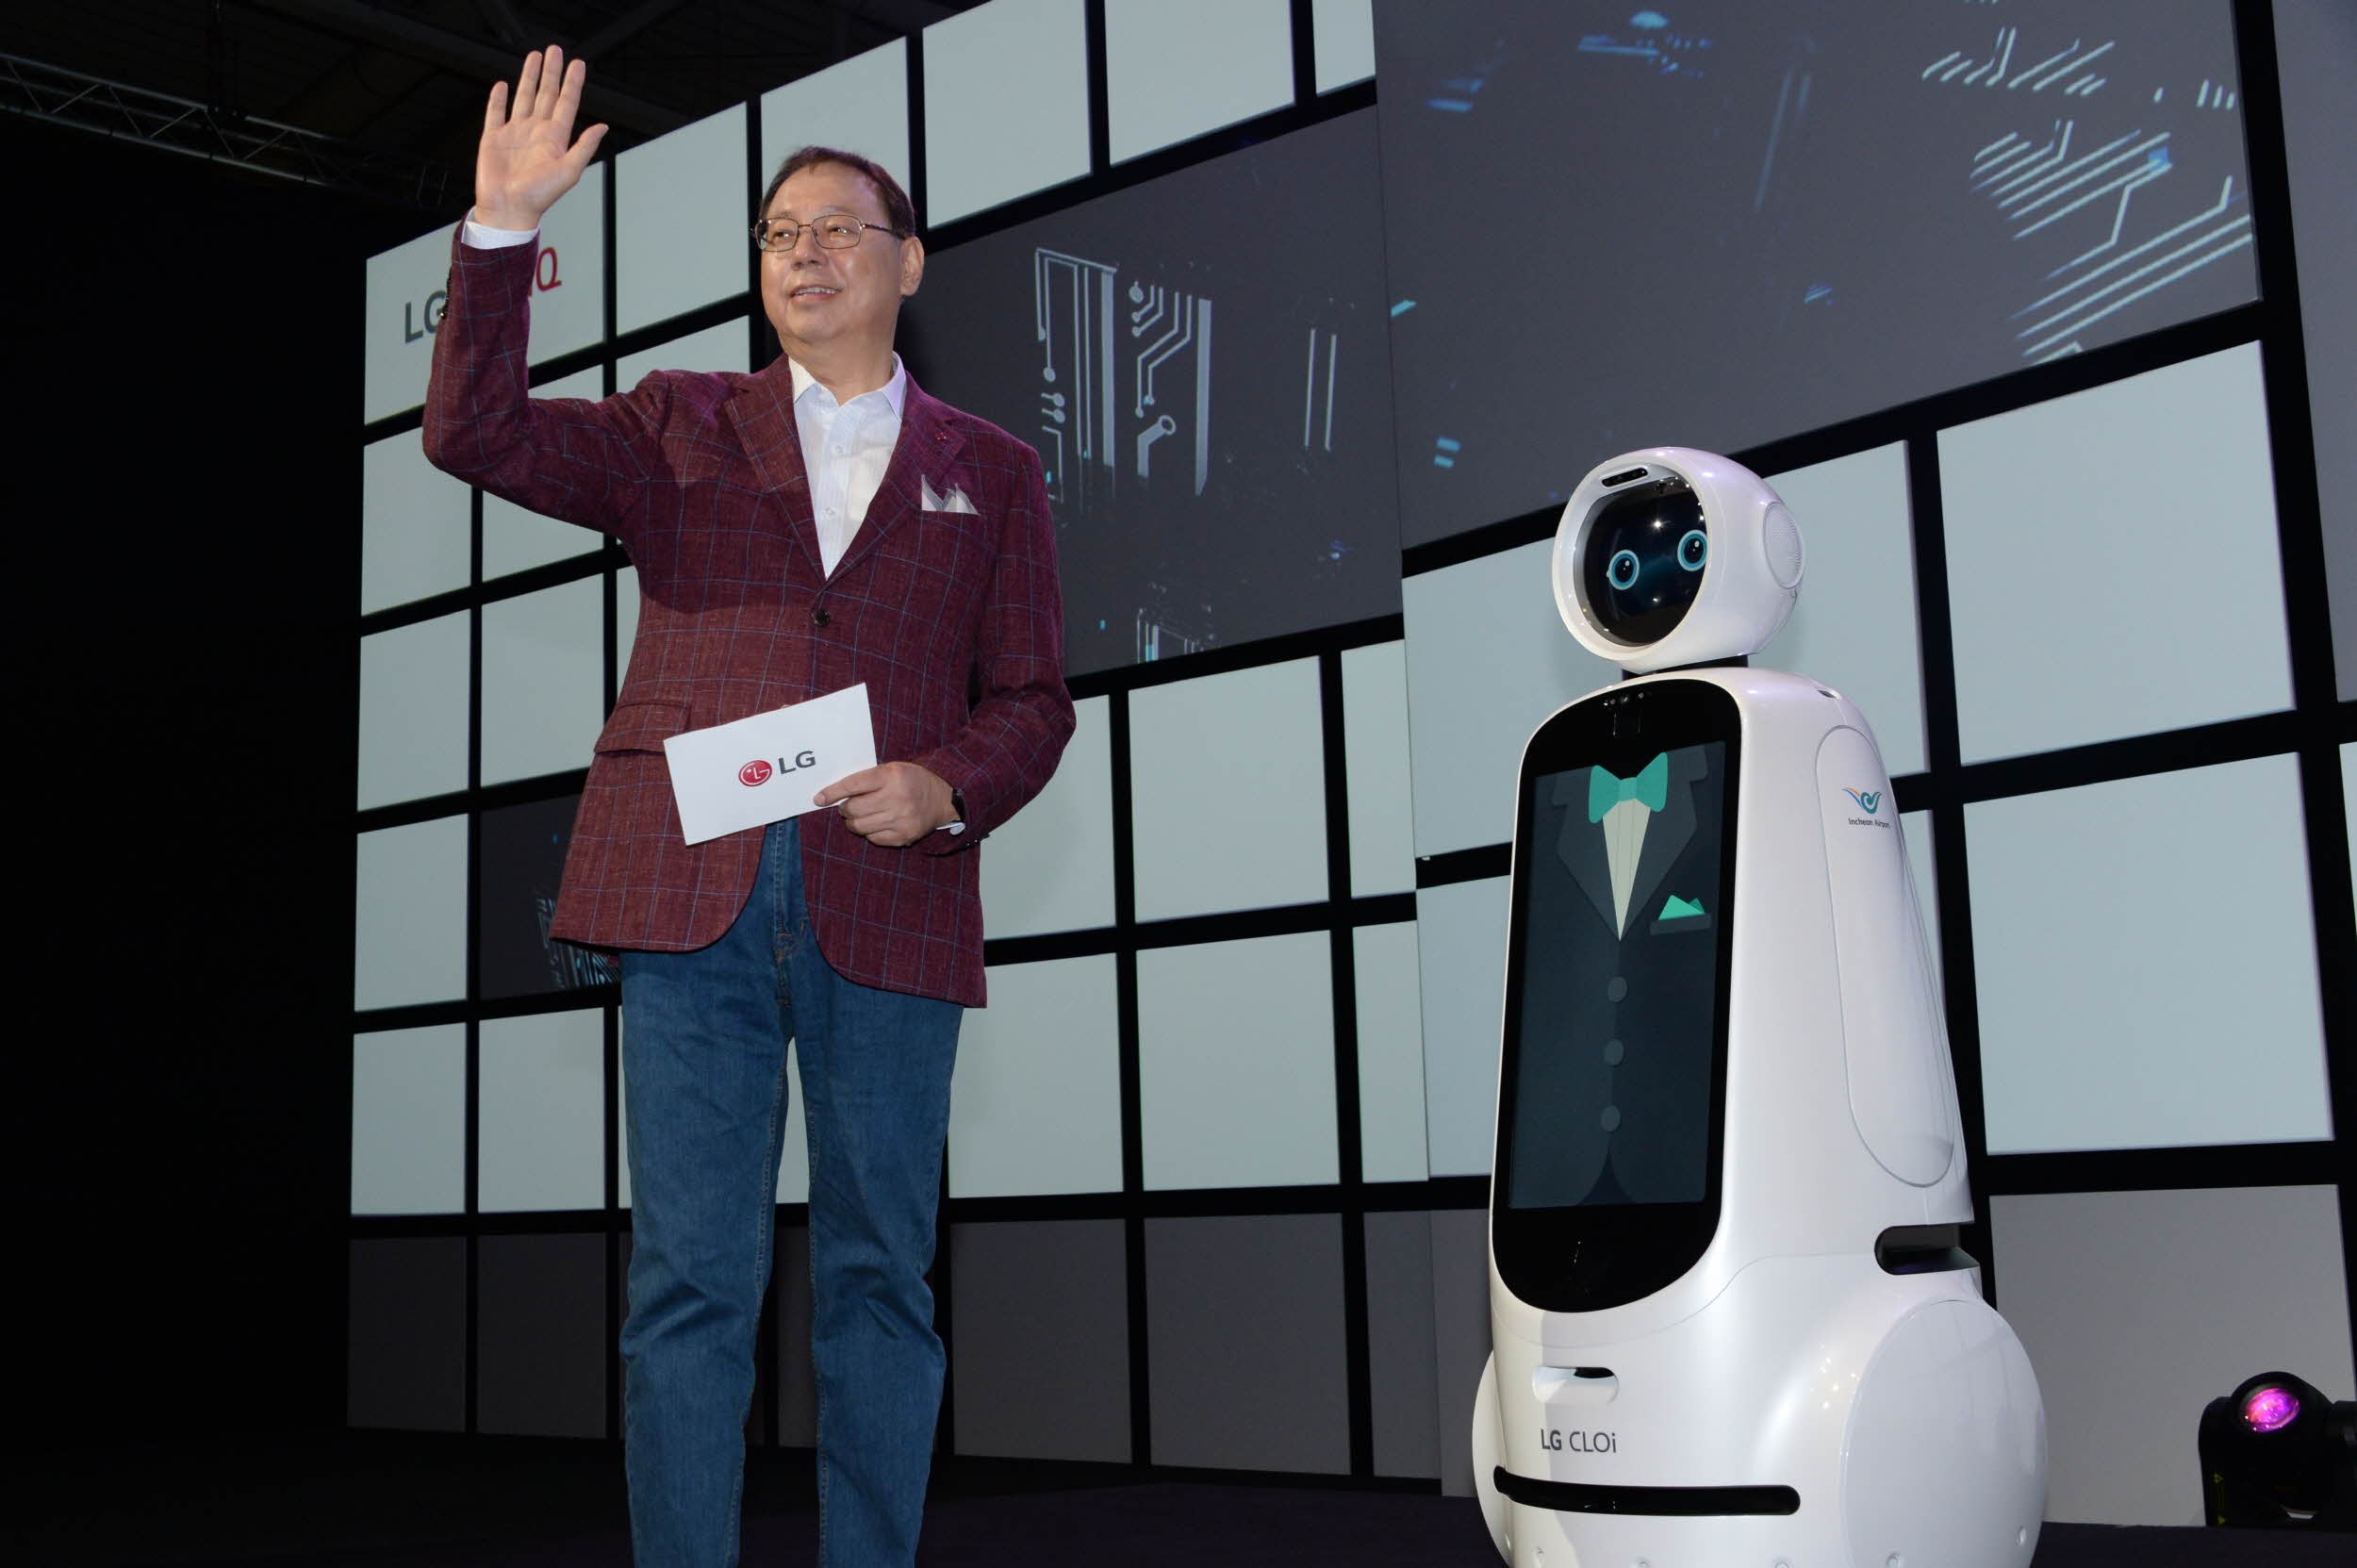 LG Electronics chief executive officer, Jo Seong-jin, stands right next to the LG CLOi robot.